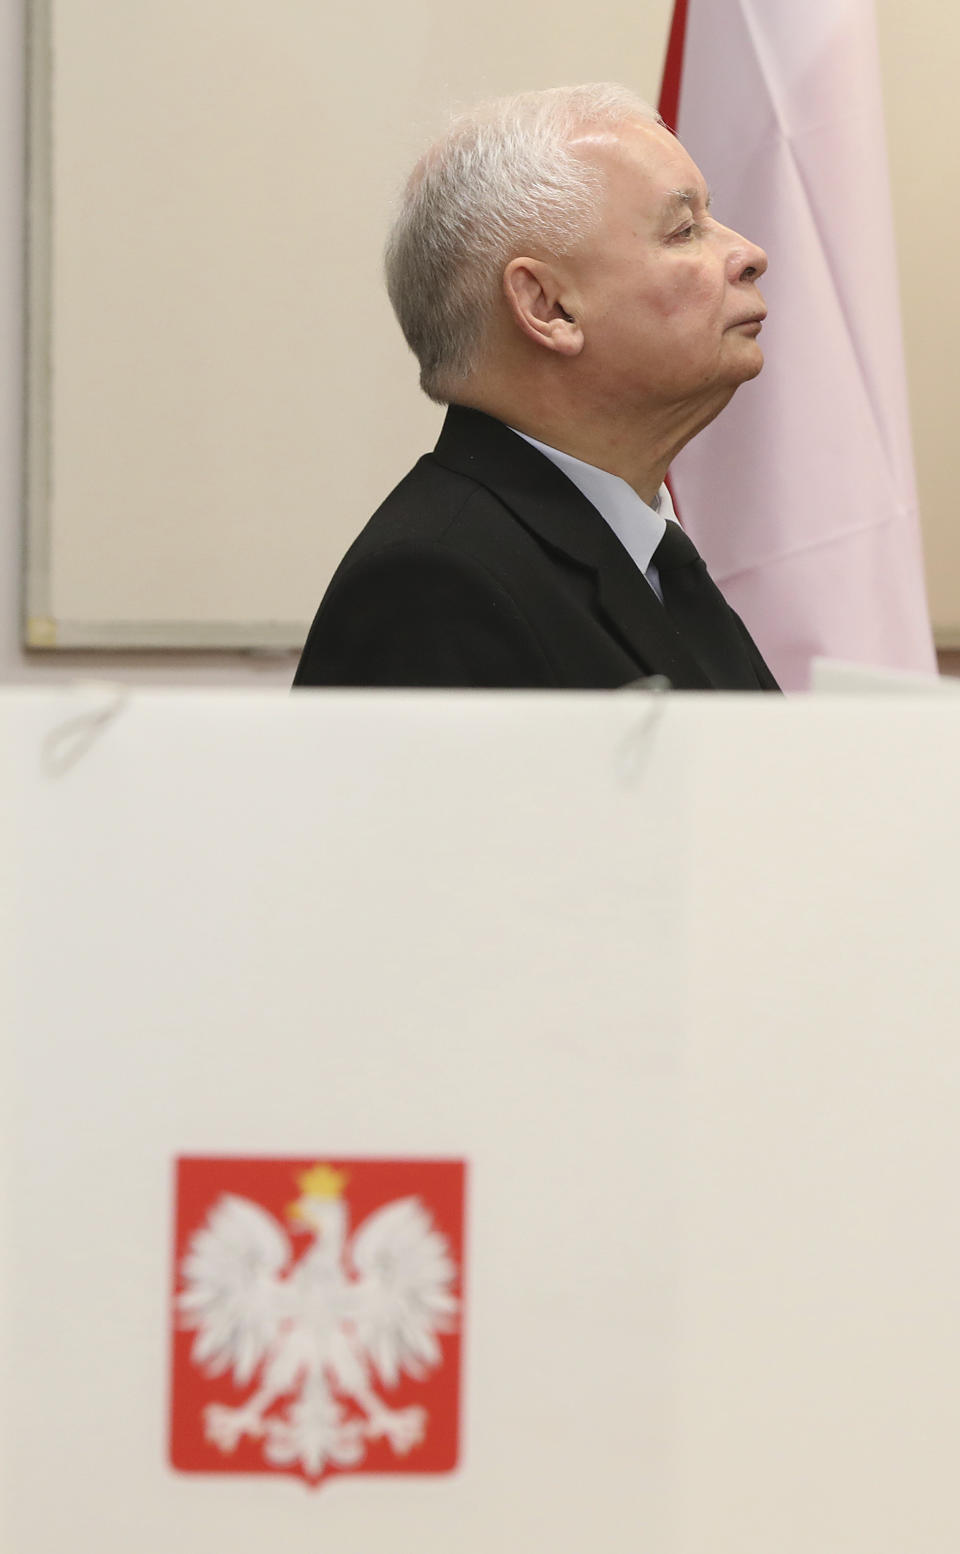 The ruling party leader Jaroslaw Kaczynski holds his ballot at a polling station in Warsaw, Poland, Sunday, Oct. 13, 2019. Poles are voting Sunday in a parliamentary election that Kaczynski is favored to win easily, buoyed by the popularity of its social conservatism and generous social spending policies that have reduced poverty. (AP Photo/Czarek Sokolowski)